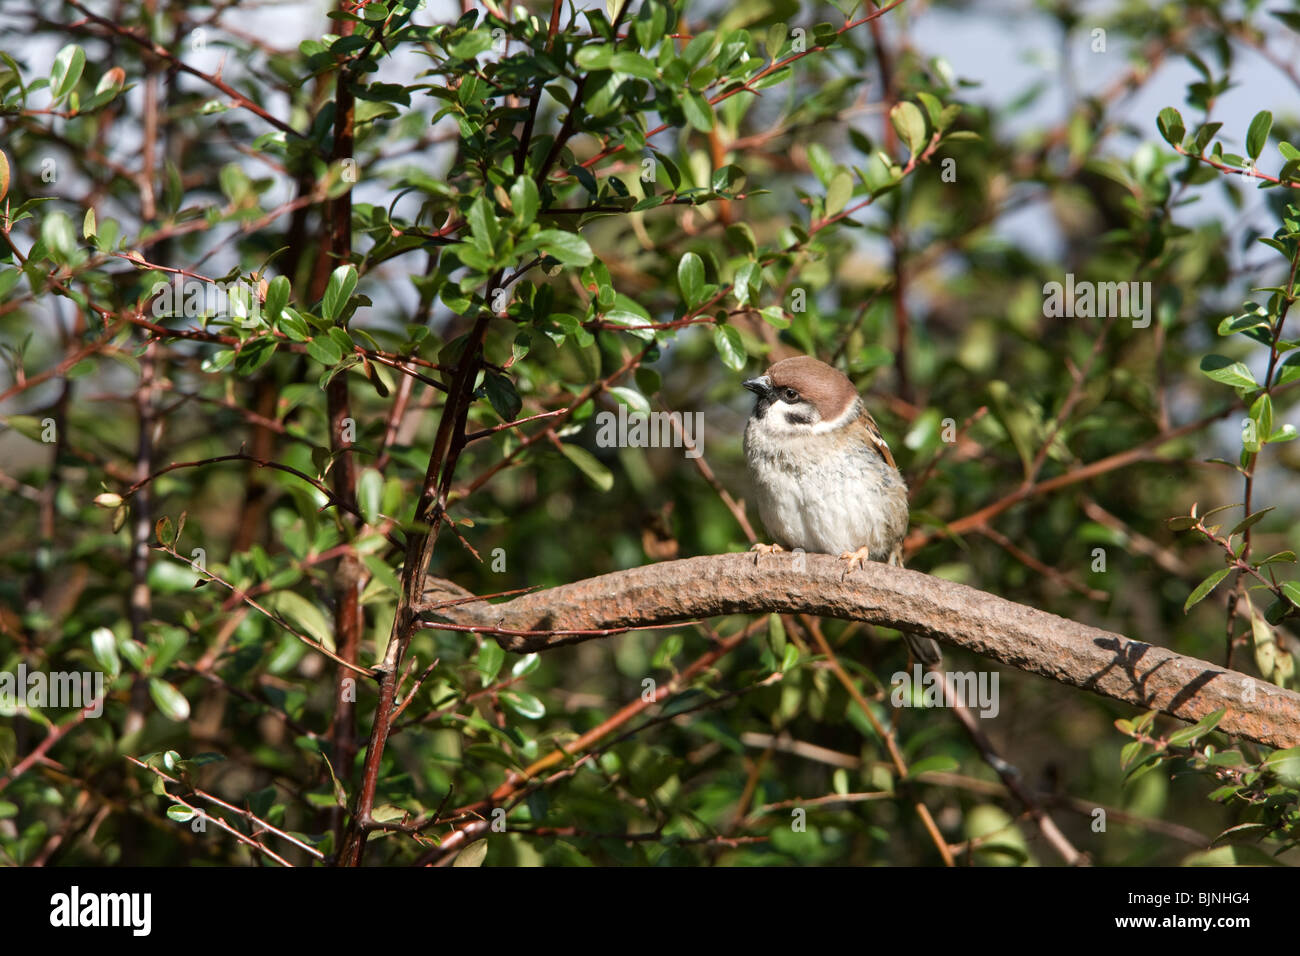 Eurasian Tree Sparrow Passer montanus perched on an old metal implement Stock Photo